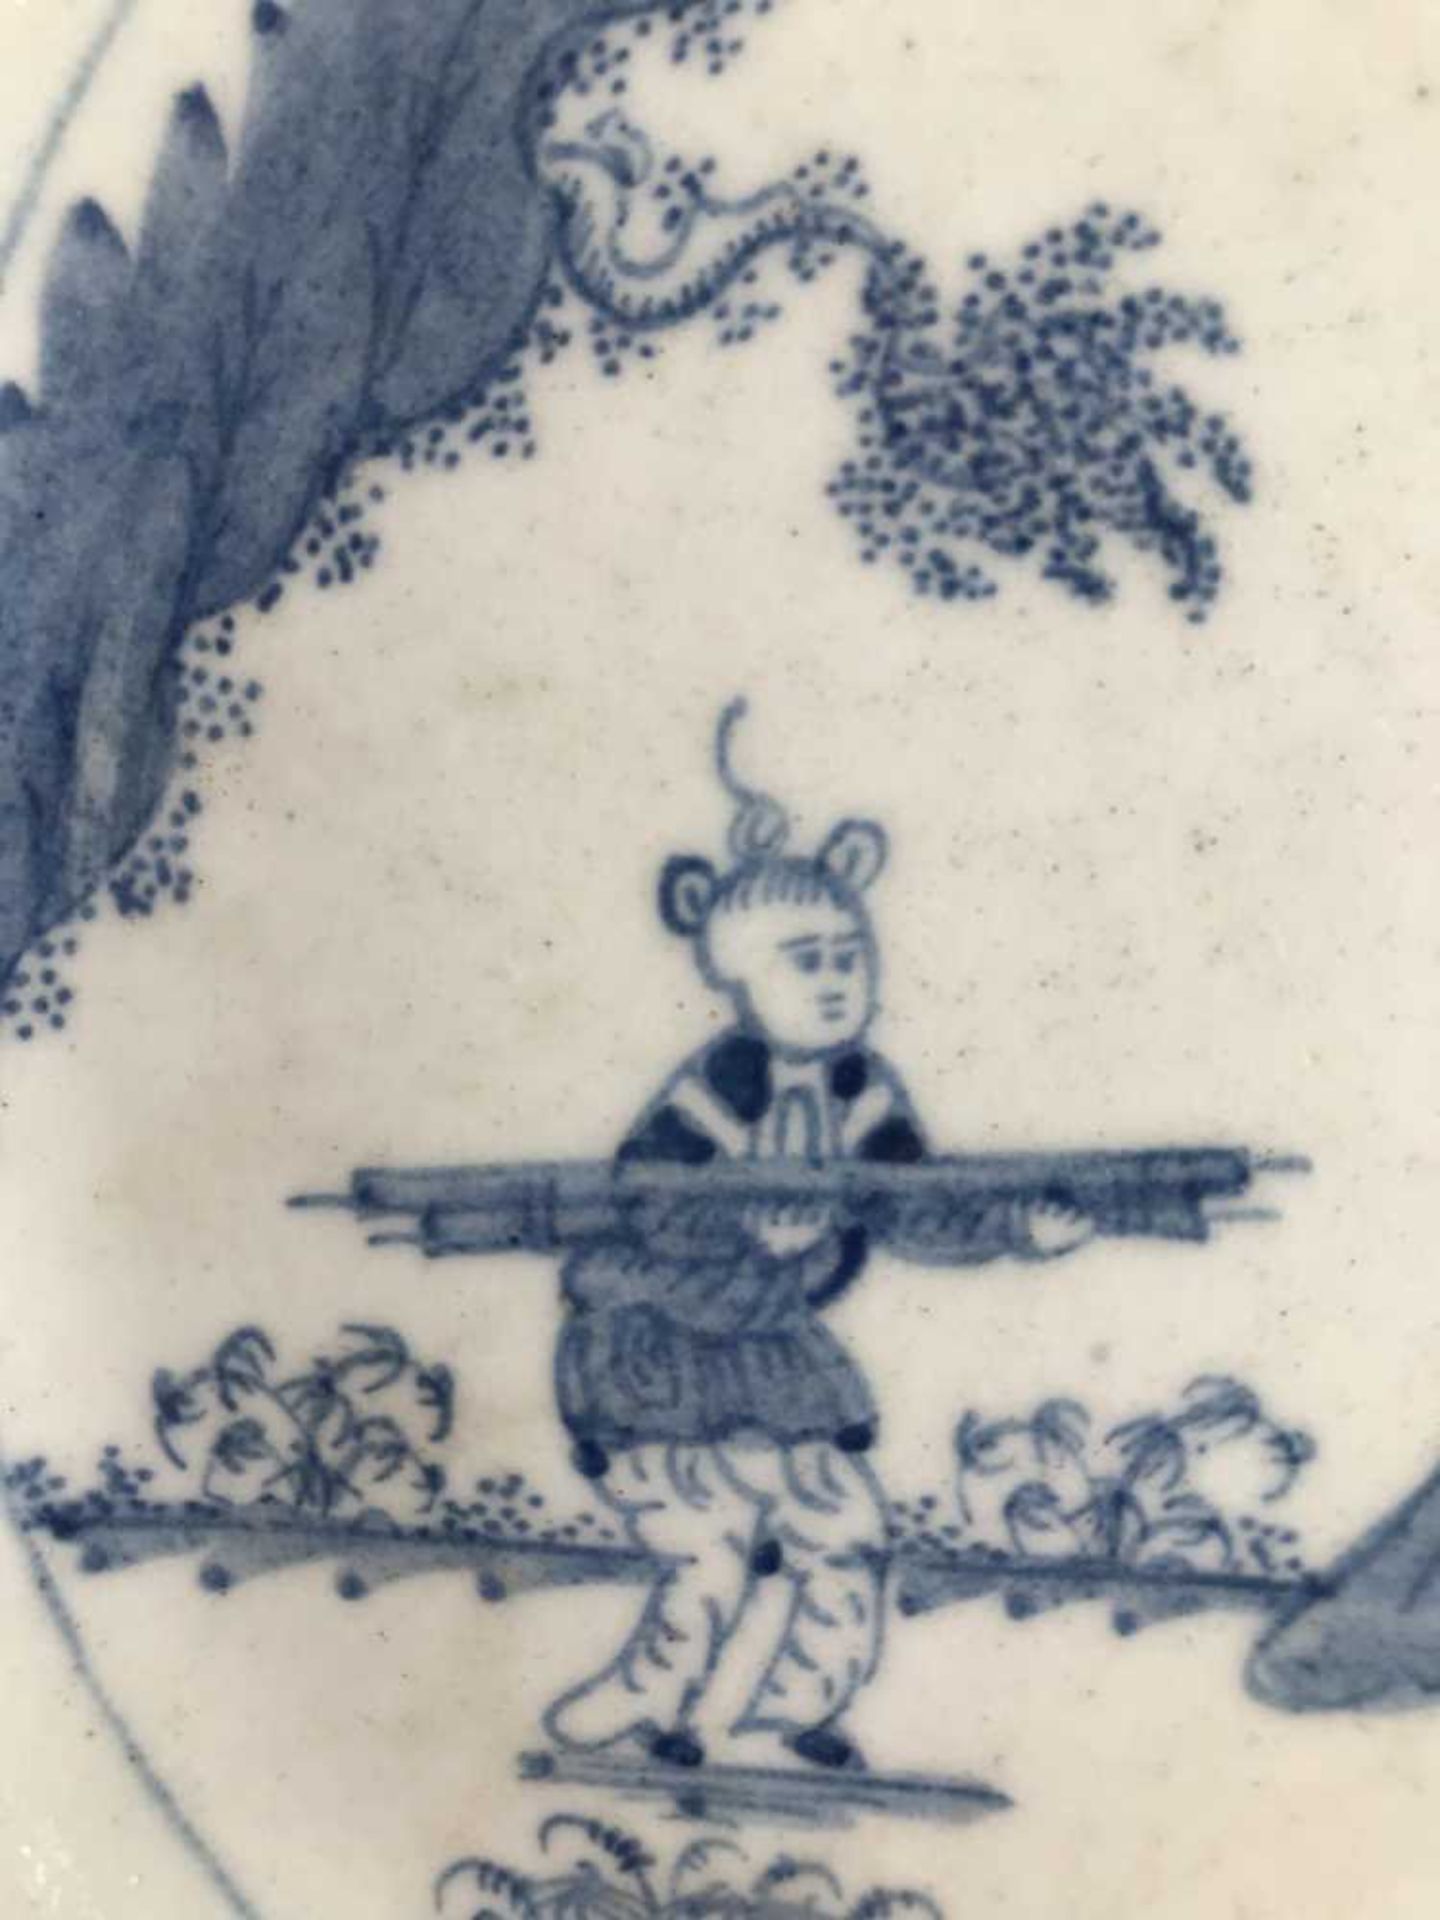 BOW OCTAGONAL GOLFER AND CADDY PATTERN BLUE PAINTED PLATE CIRCA 1760 - Image 5 of 9